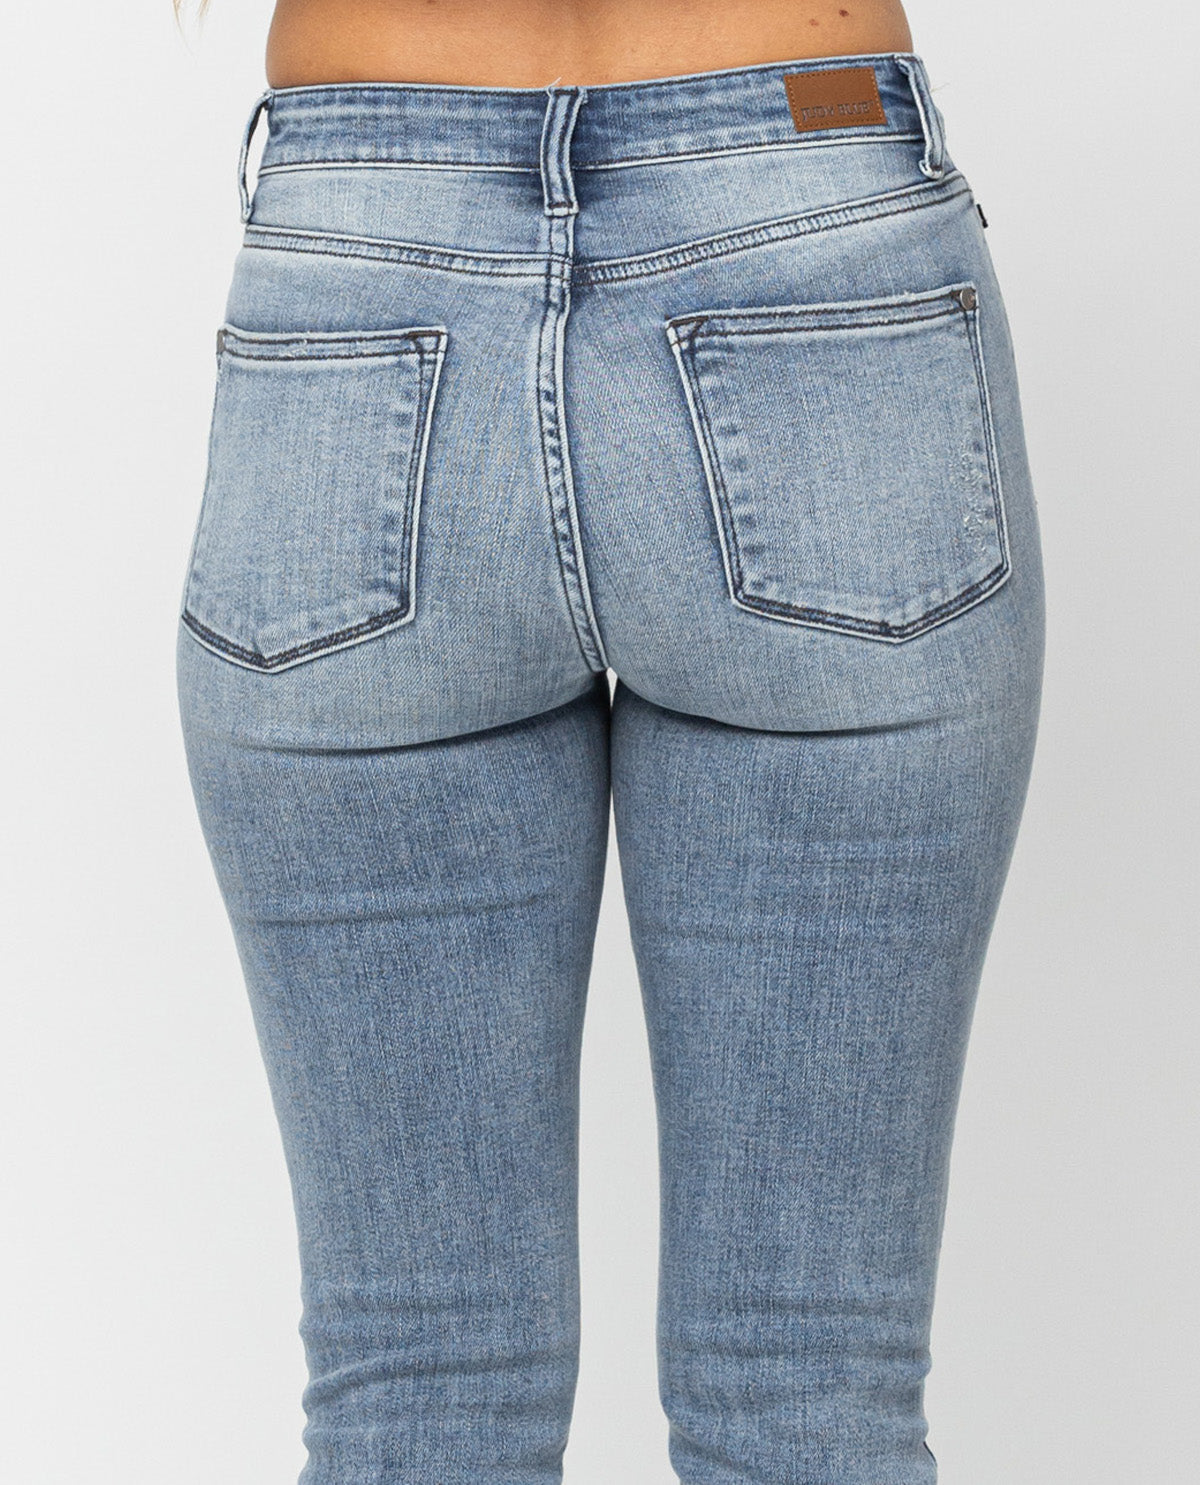 Judy Blue High Rise Skinny Fit Destroyed Jeans